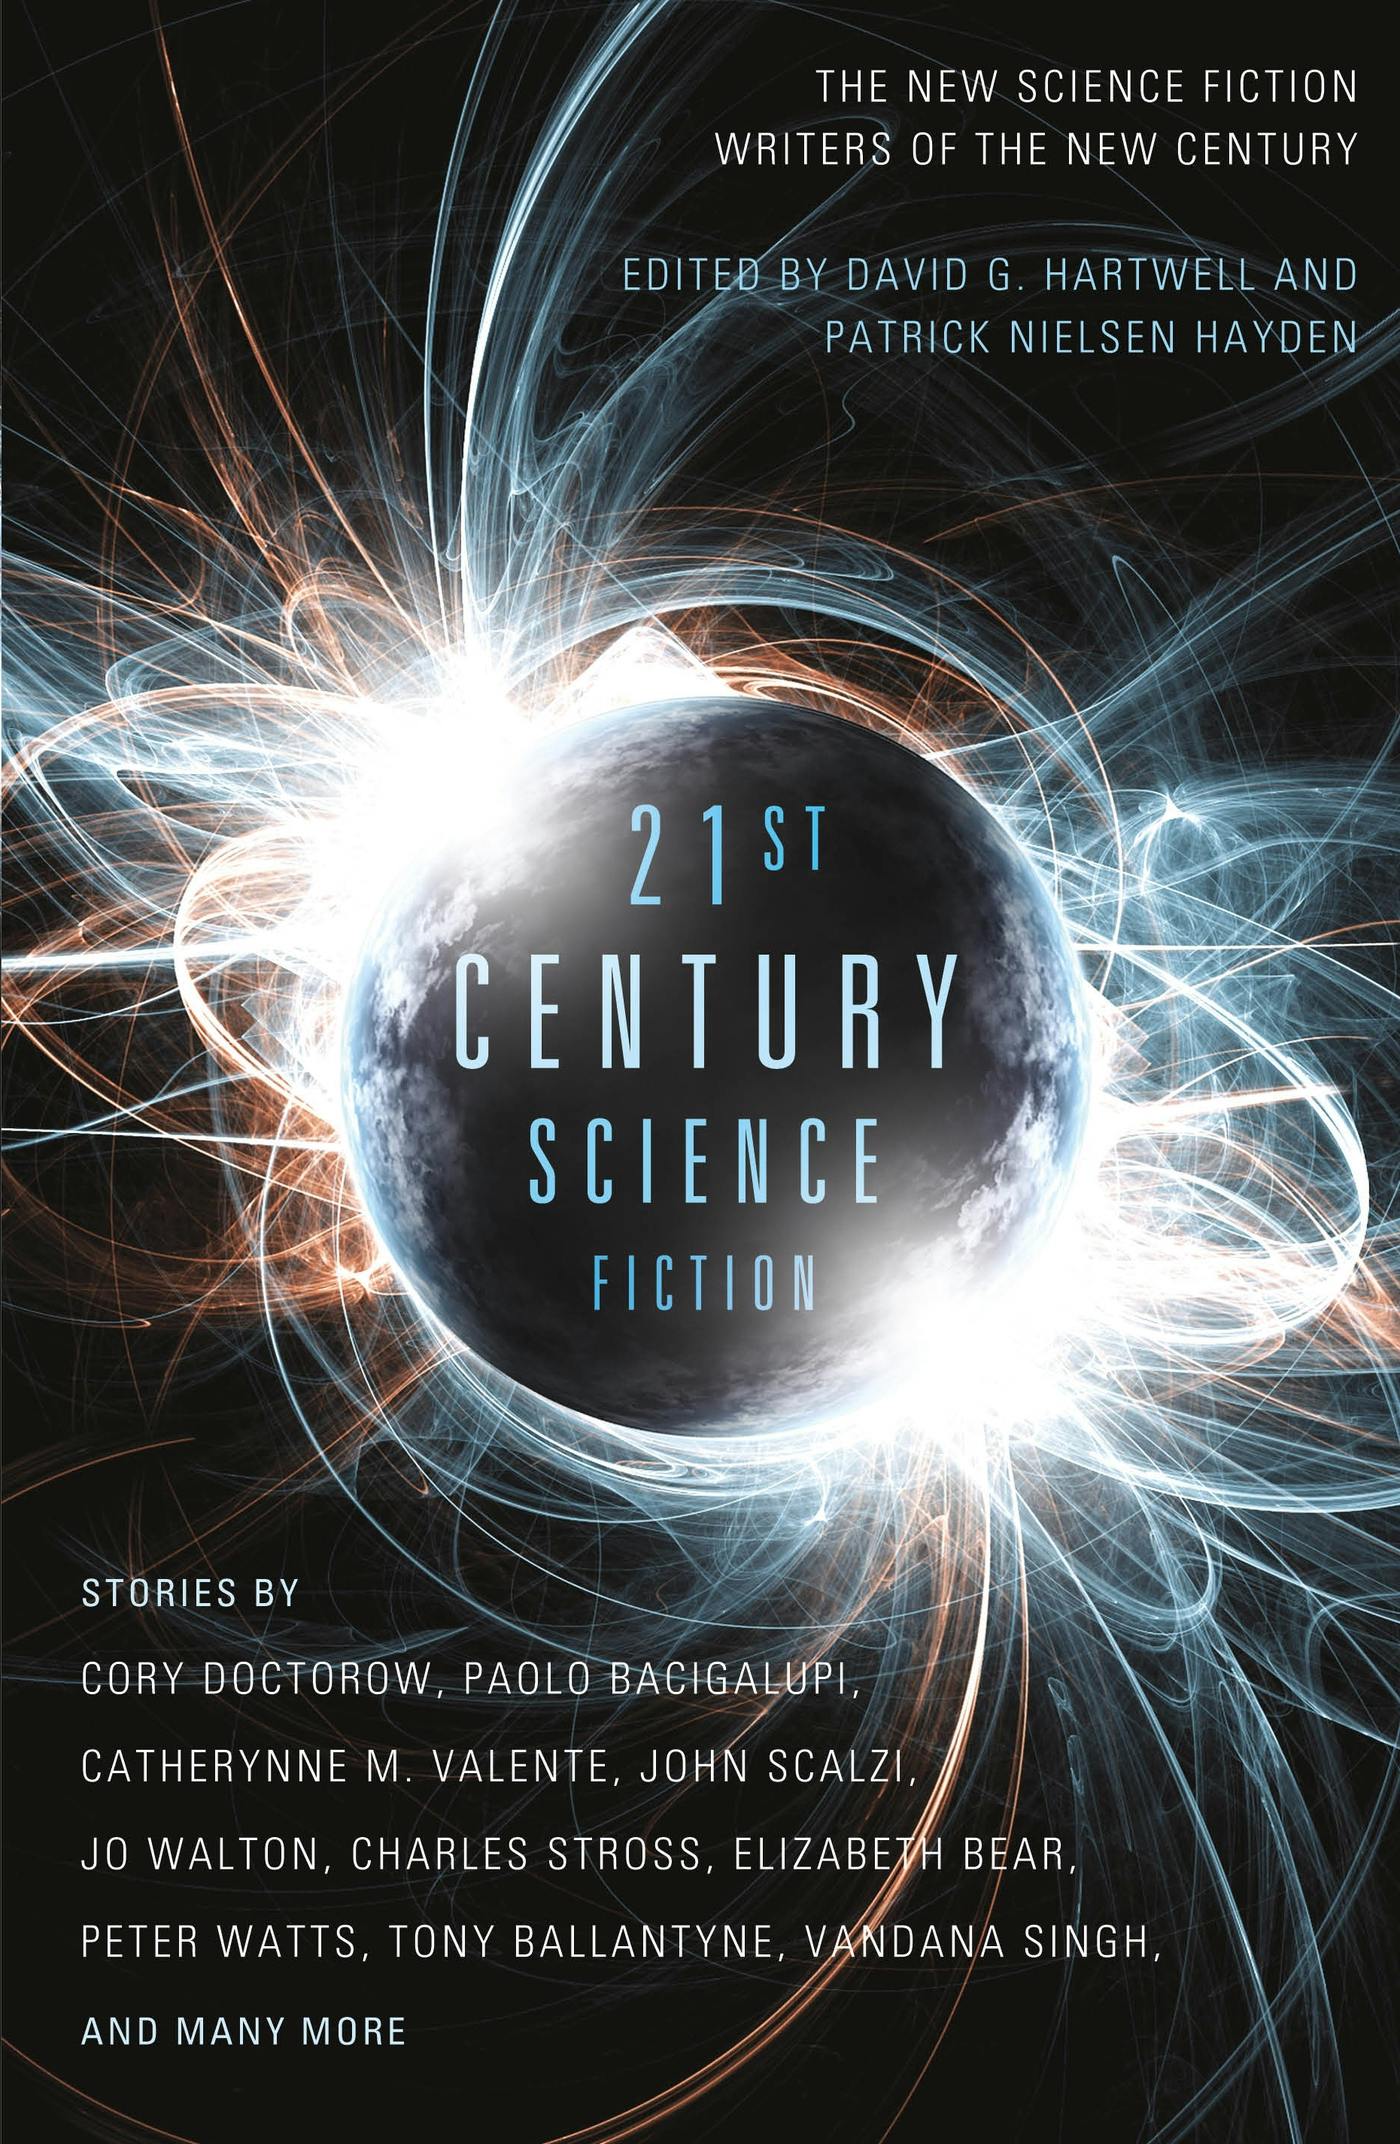 Cover for the book titled as: Twenty-First Century Science Fiction